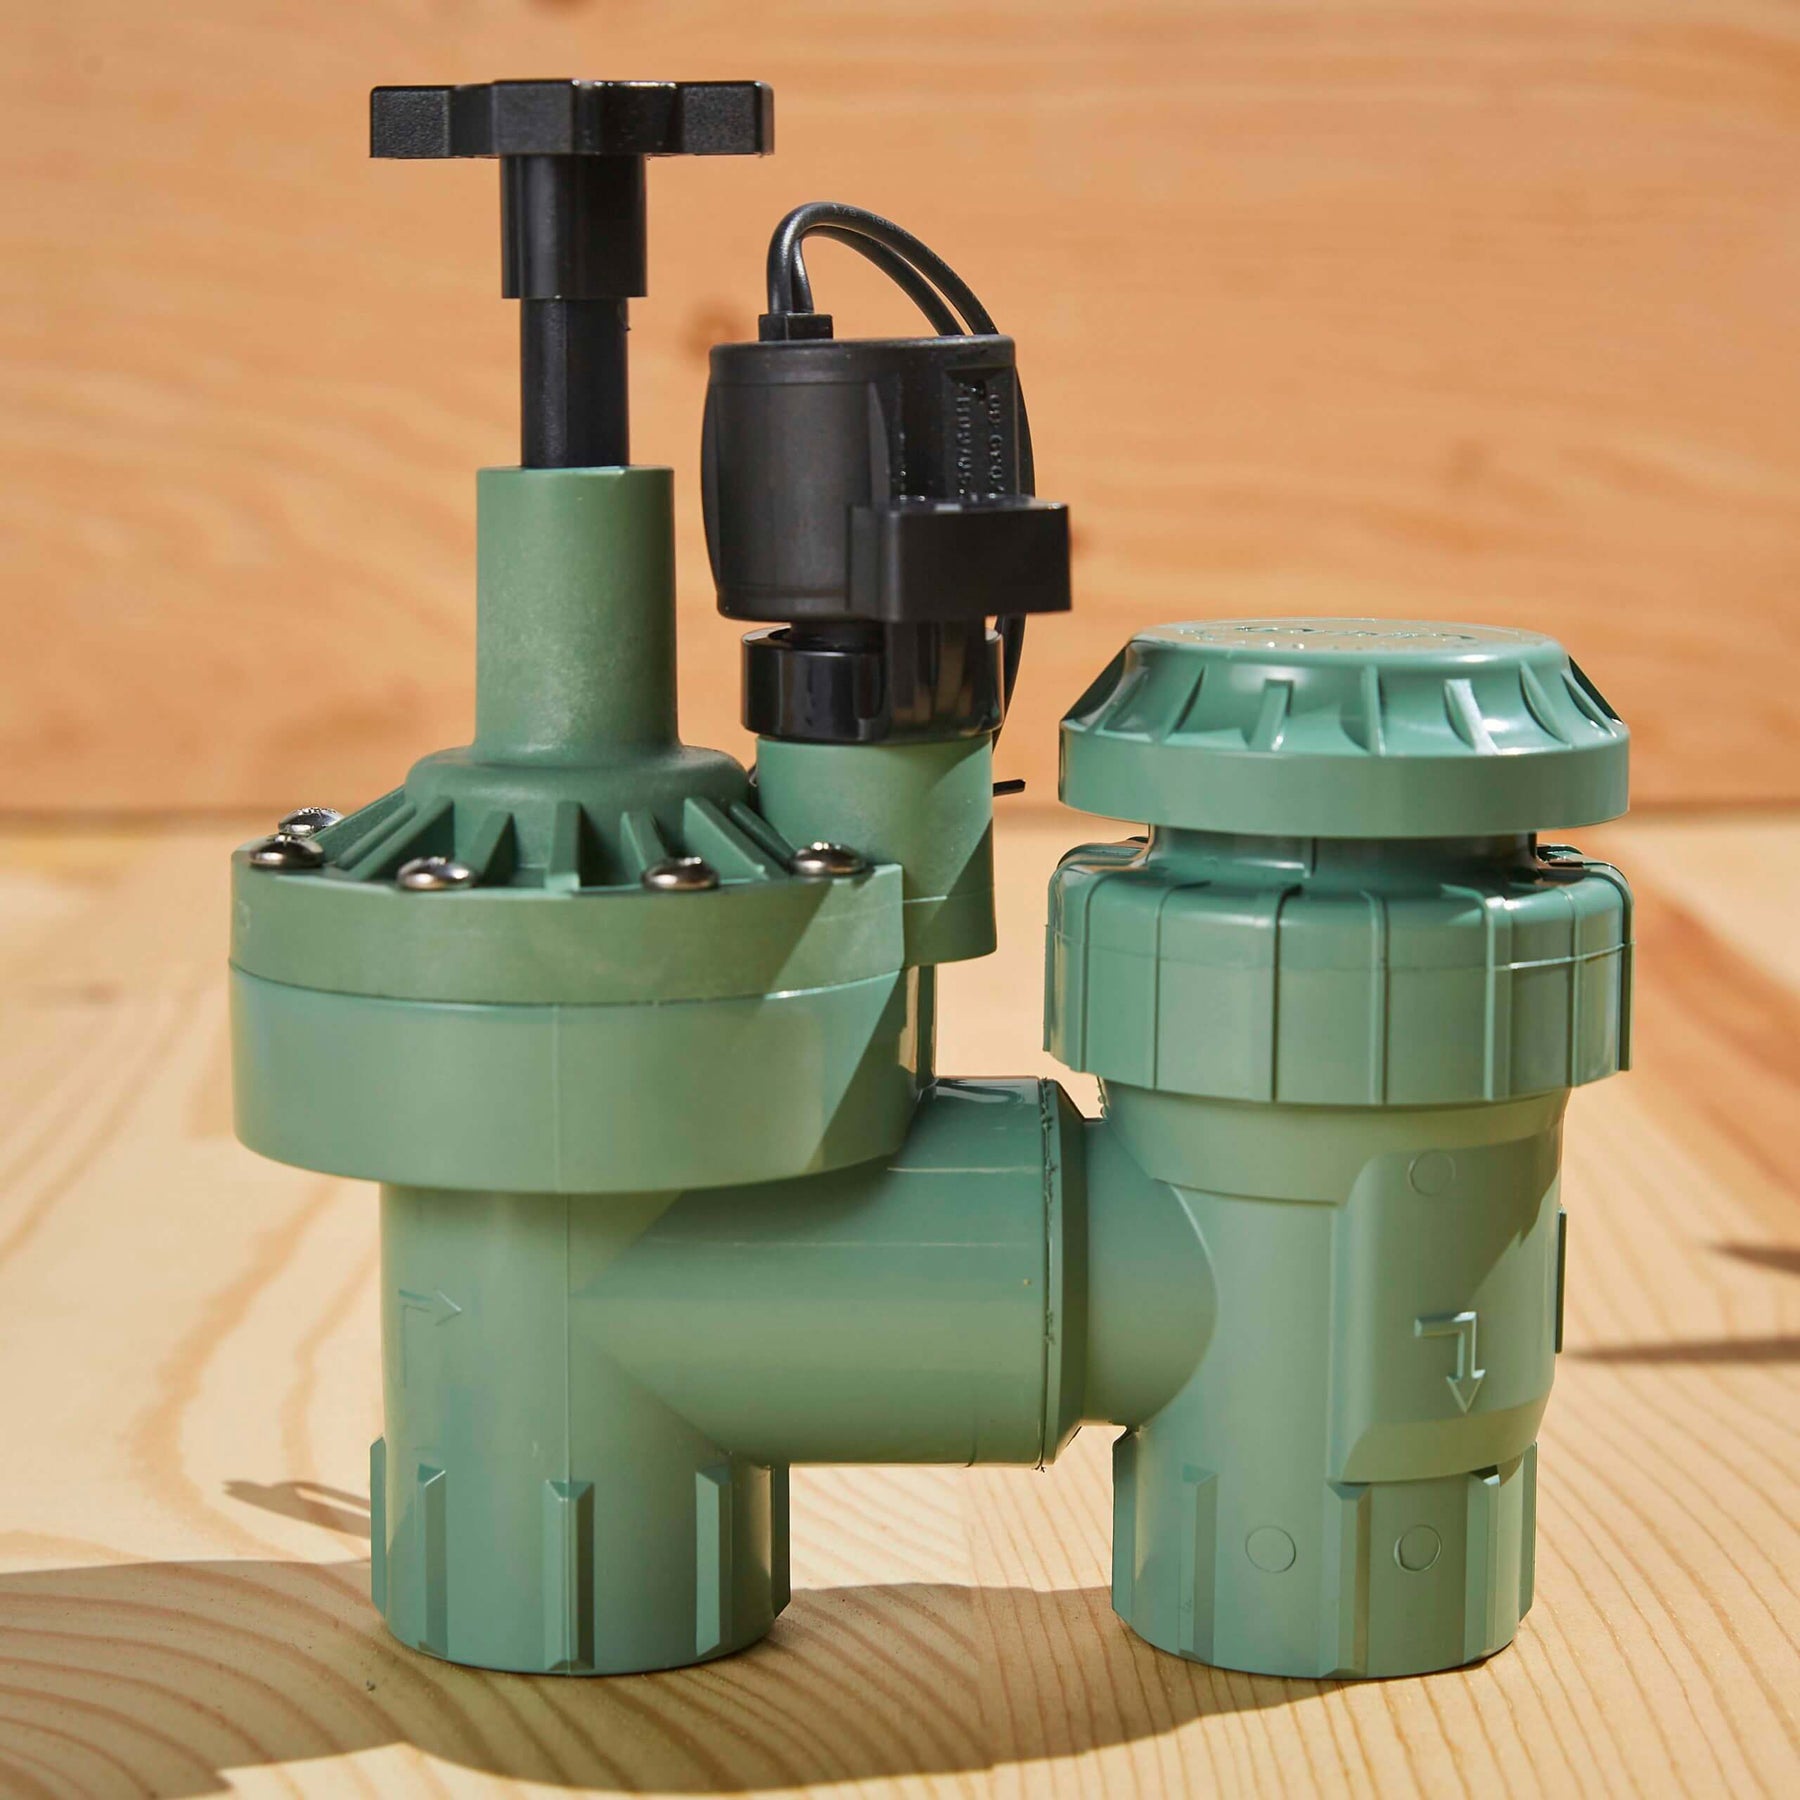 Professional Anti-Siphon Valve - Growing Systems